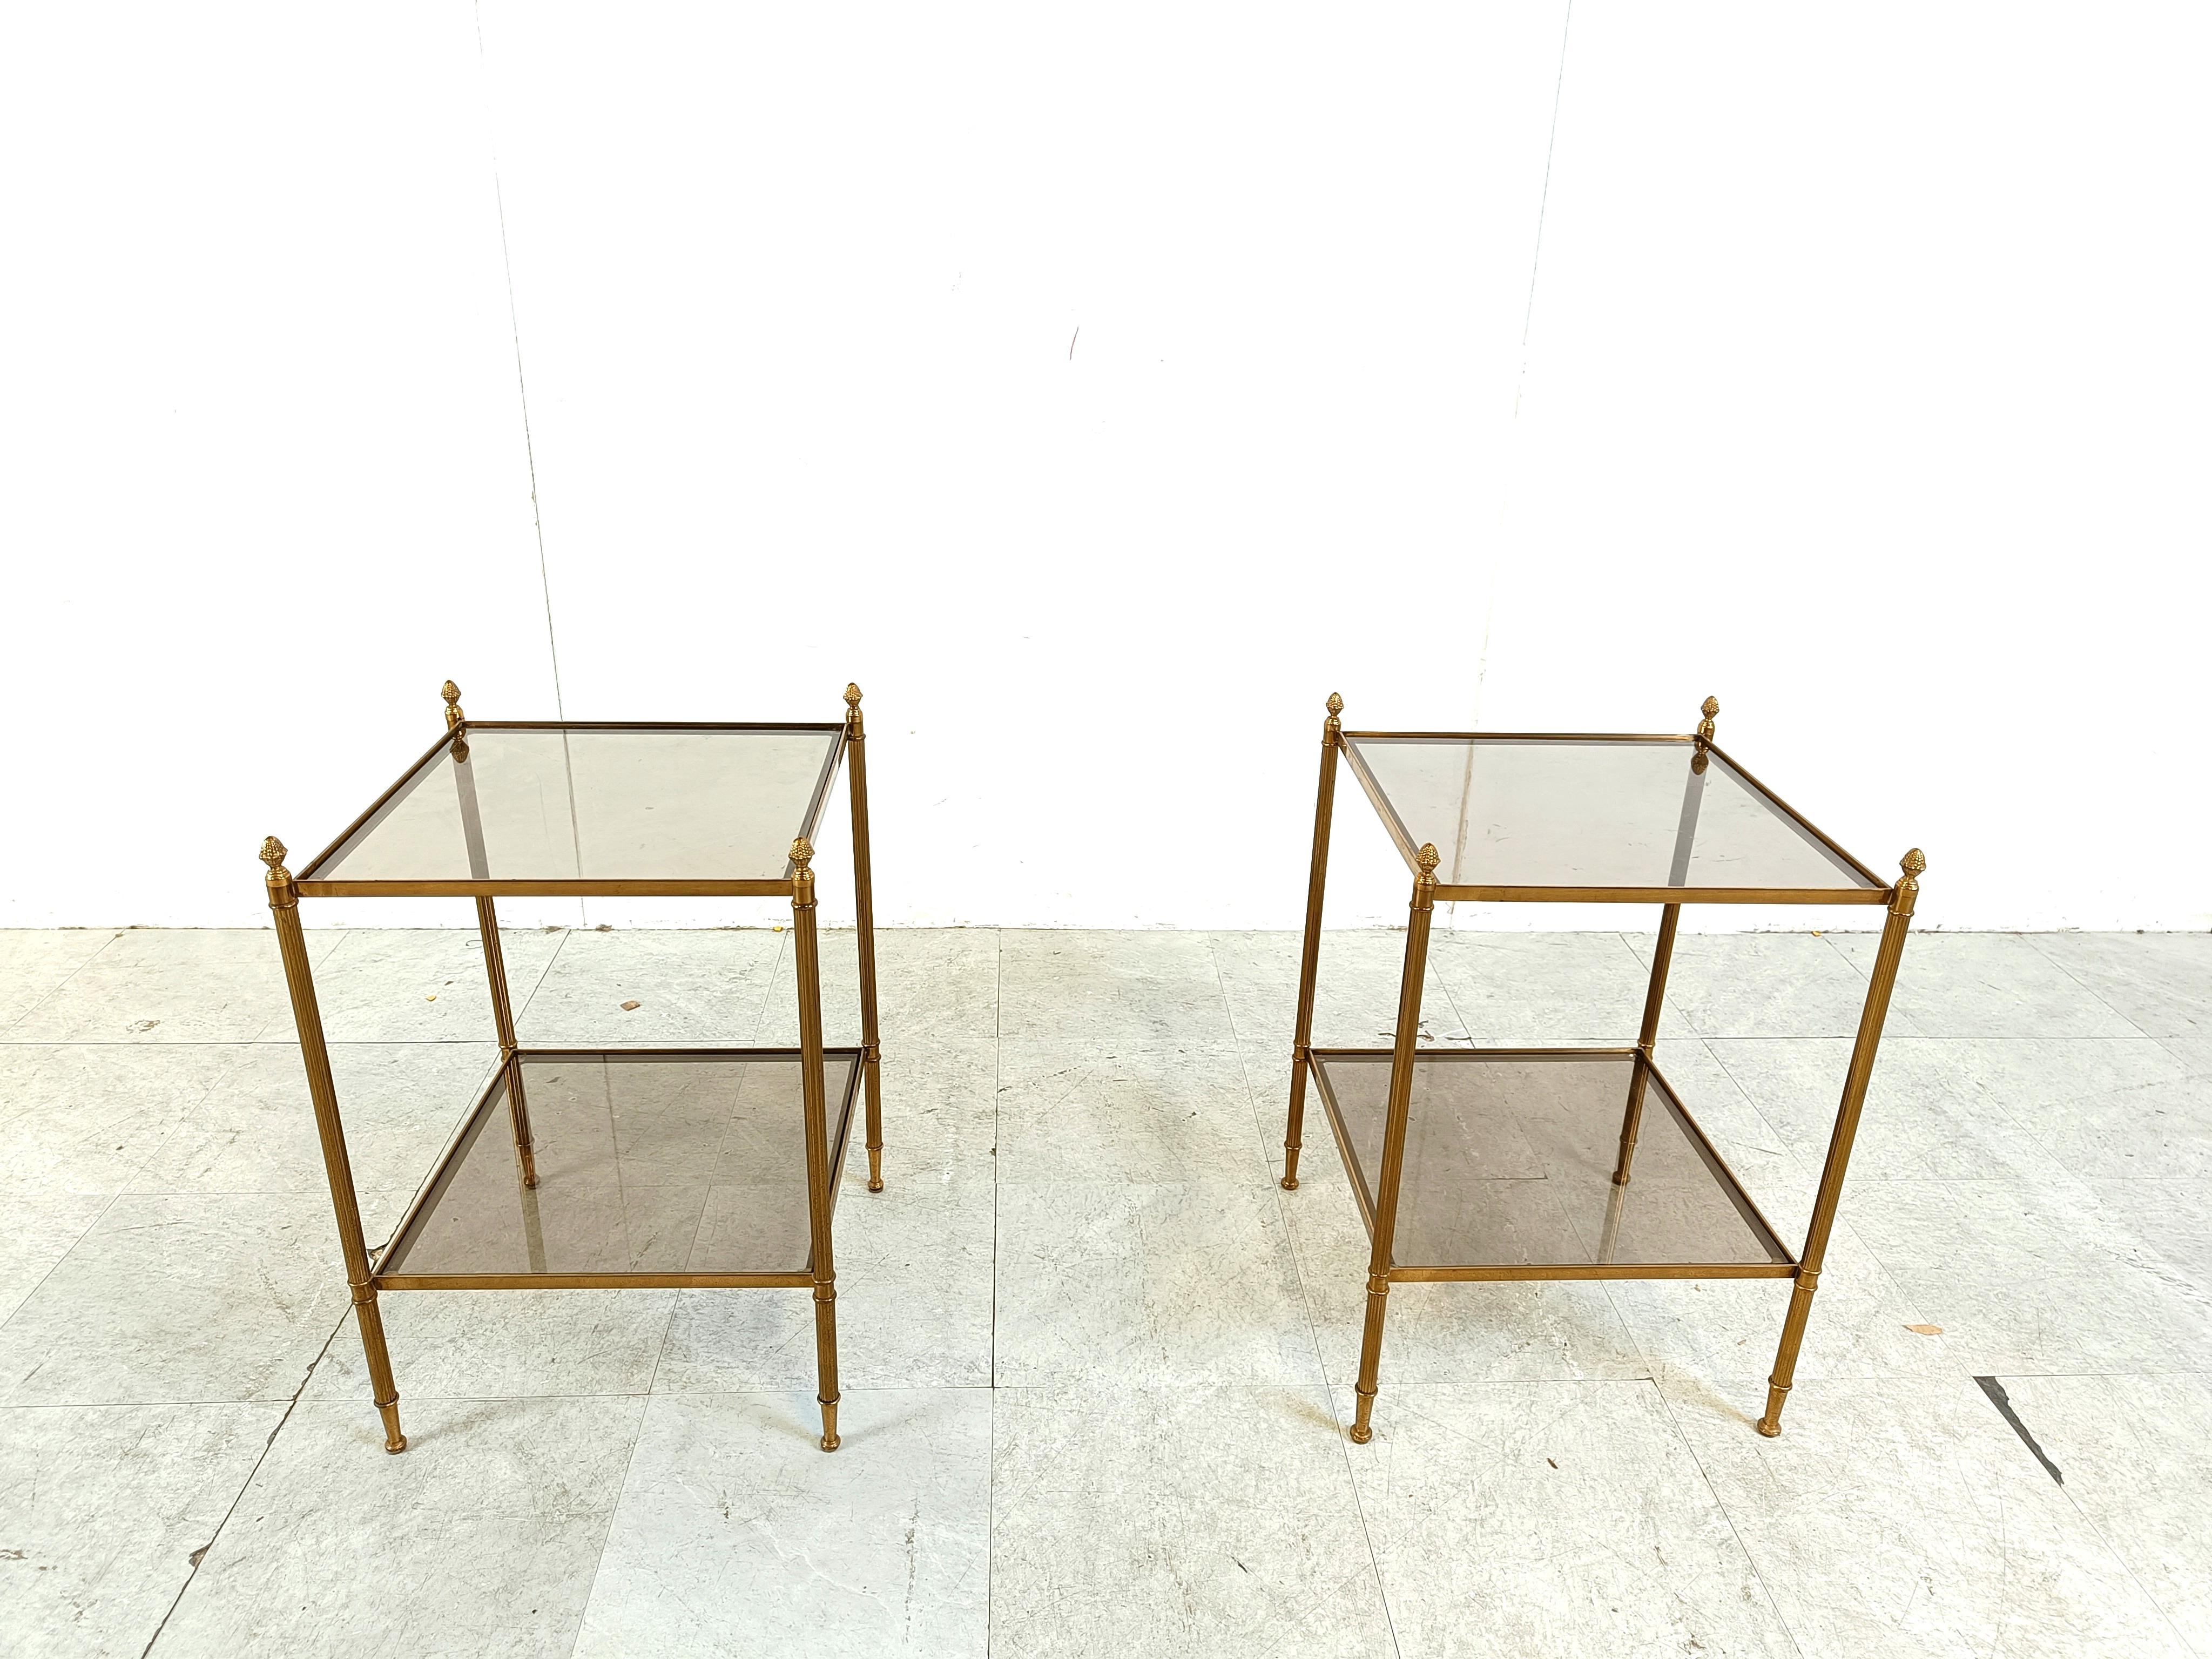 Mid century gbrass acorn side tables by in the manner of Maison Jansen. 

The side tables have two tier smoked glasses.

1960s - France

Dimensions:
Height: 58cm
Width x depth: 40cm

Ref.: 302052
